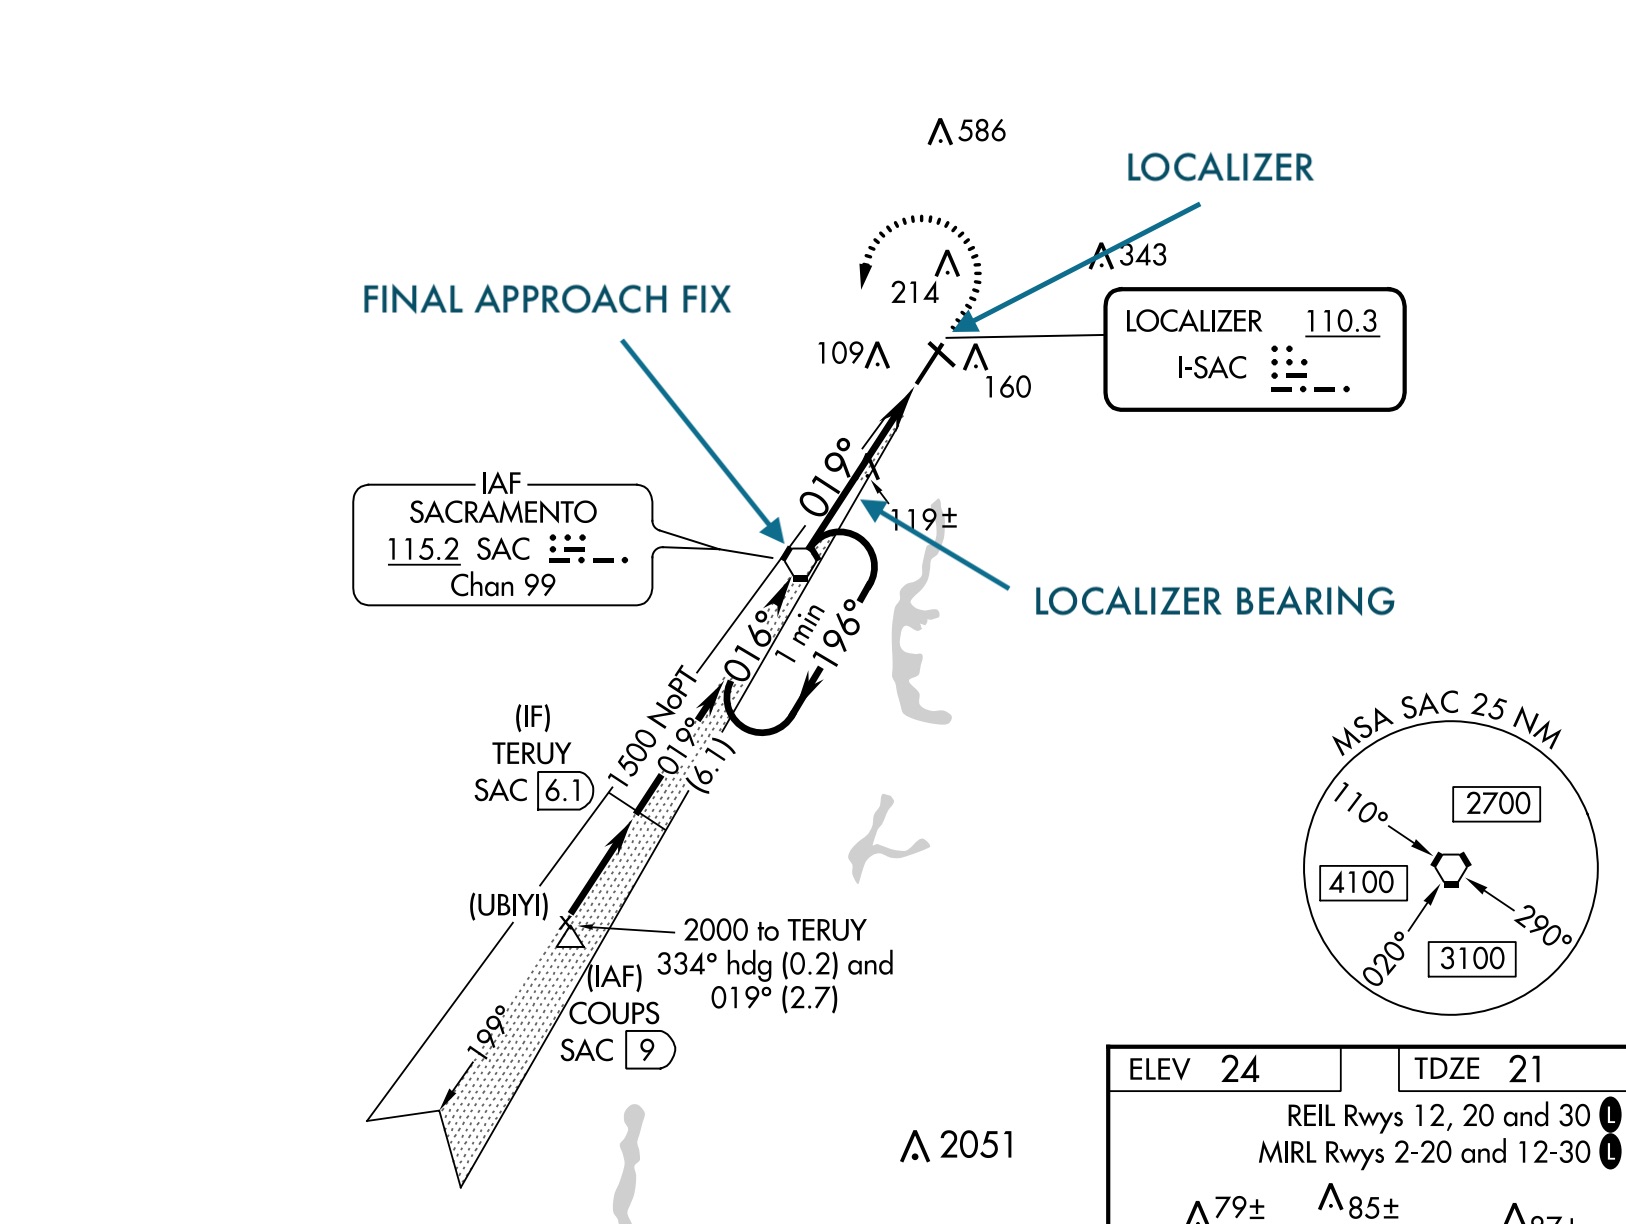 Localizer bearing estimated from localizer and final approach fix